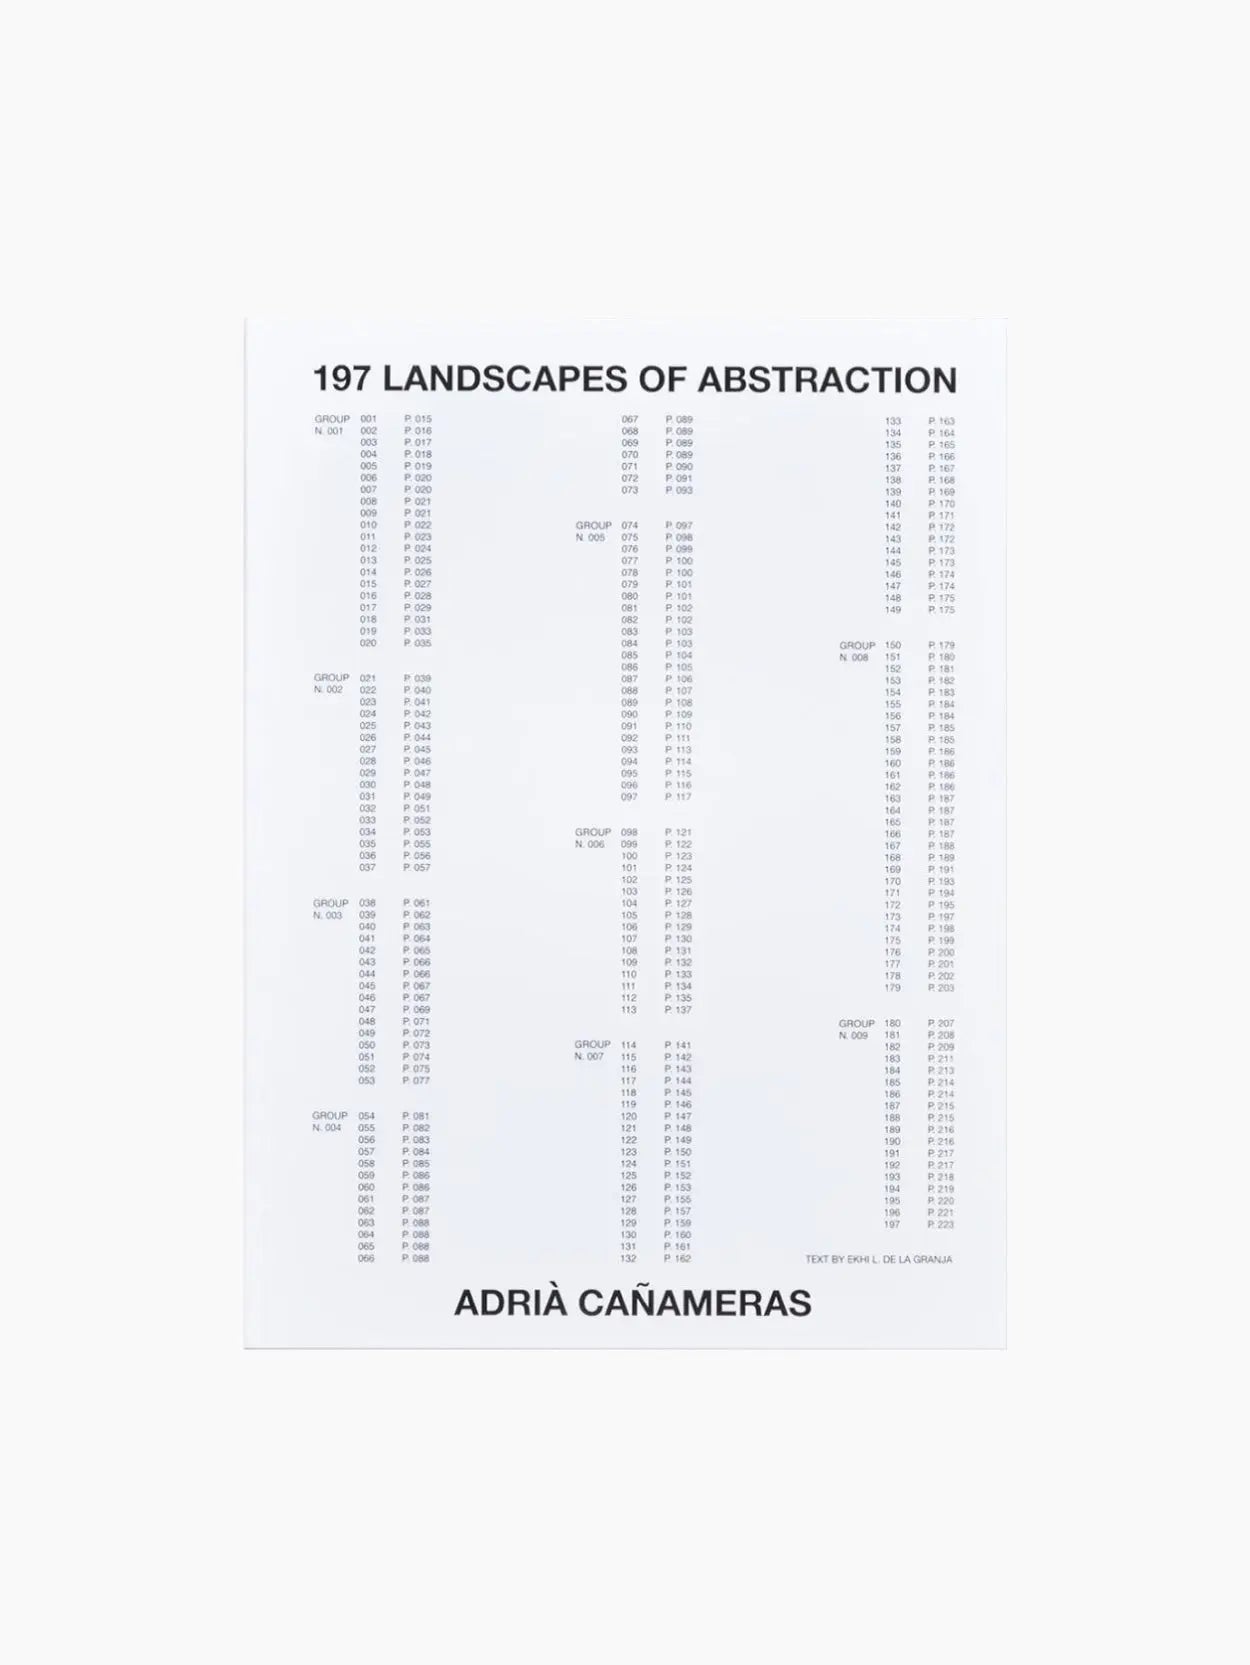 A white Progresso book cover titled "197 Landscapes of Abstraction" by Adrià Cañameras. The design features multiple columns of evenly spaced, small black text lists arranged vertically across the cover. Available at Bassal Store in Barcelona, this book is a visual treat for art lovers.